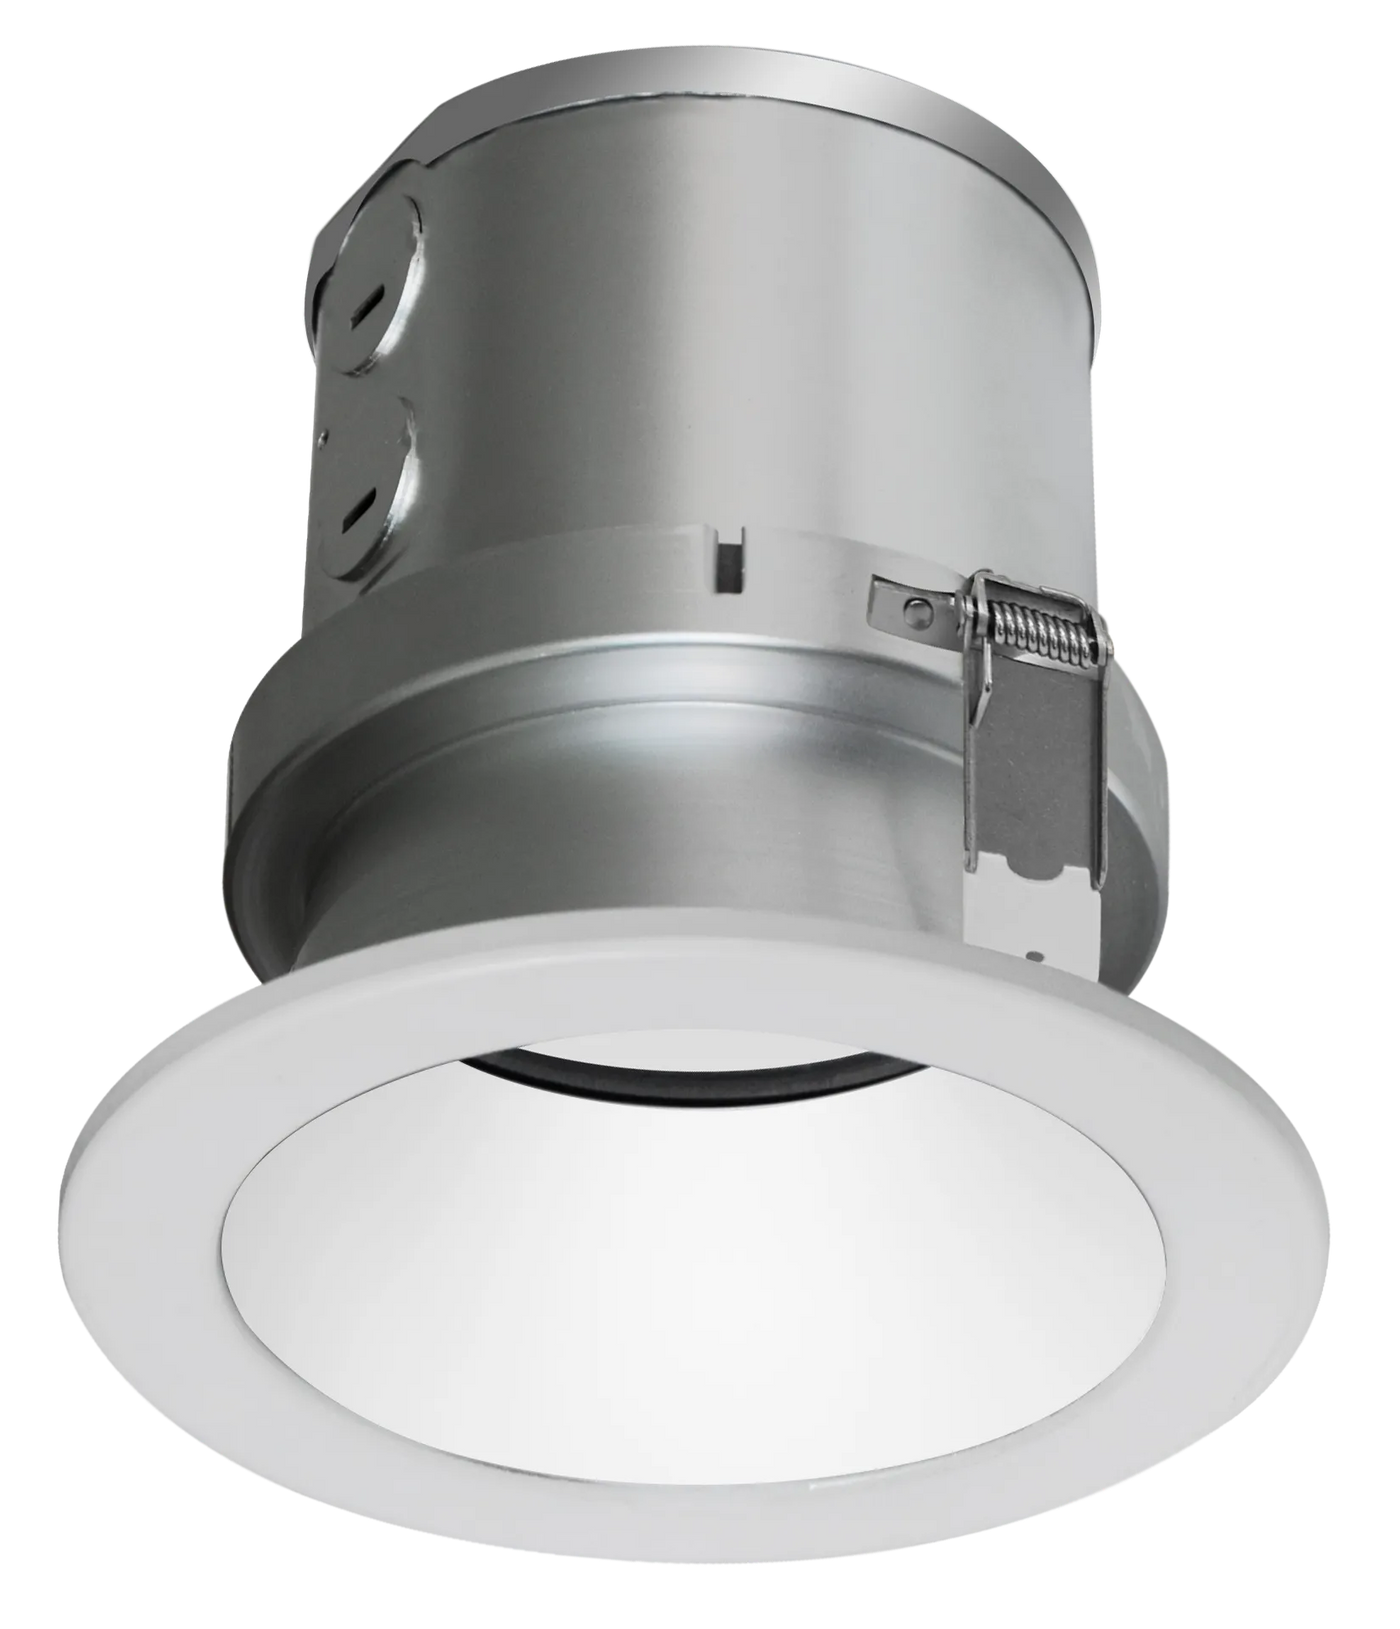 4" LED ROUND COMMERCIAL RECESSED LIGHT, 3200 LUMEN MAX, WATTAGE AND CCT SELECTABLE, 120-277V, HAZE OR WHITE